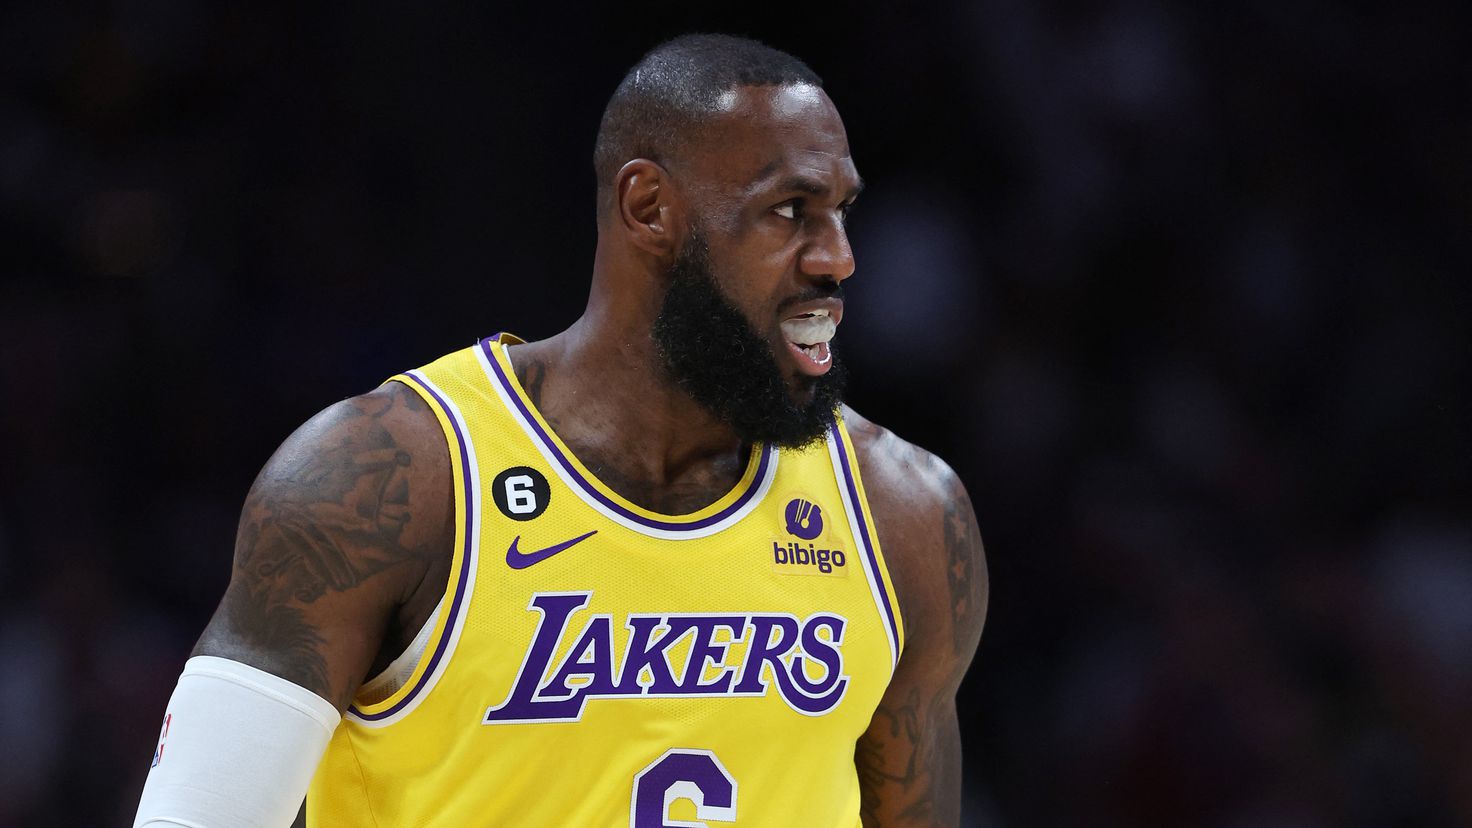 'Calling LeBron old motivated him to kick our butts': Grizzlies player Jaren Jackson Jr.
